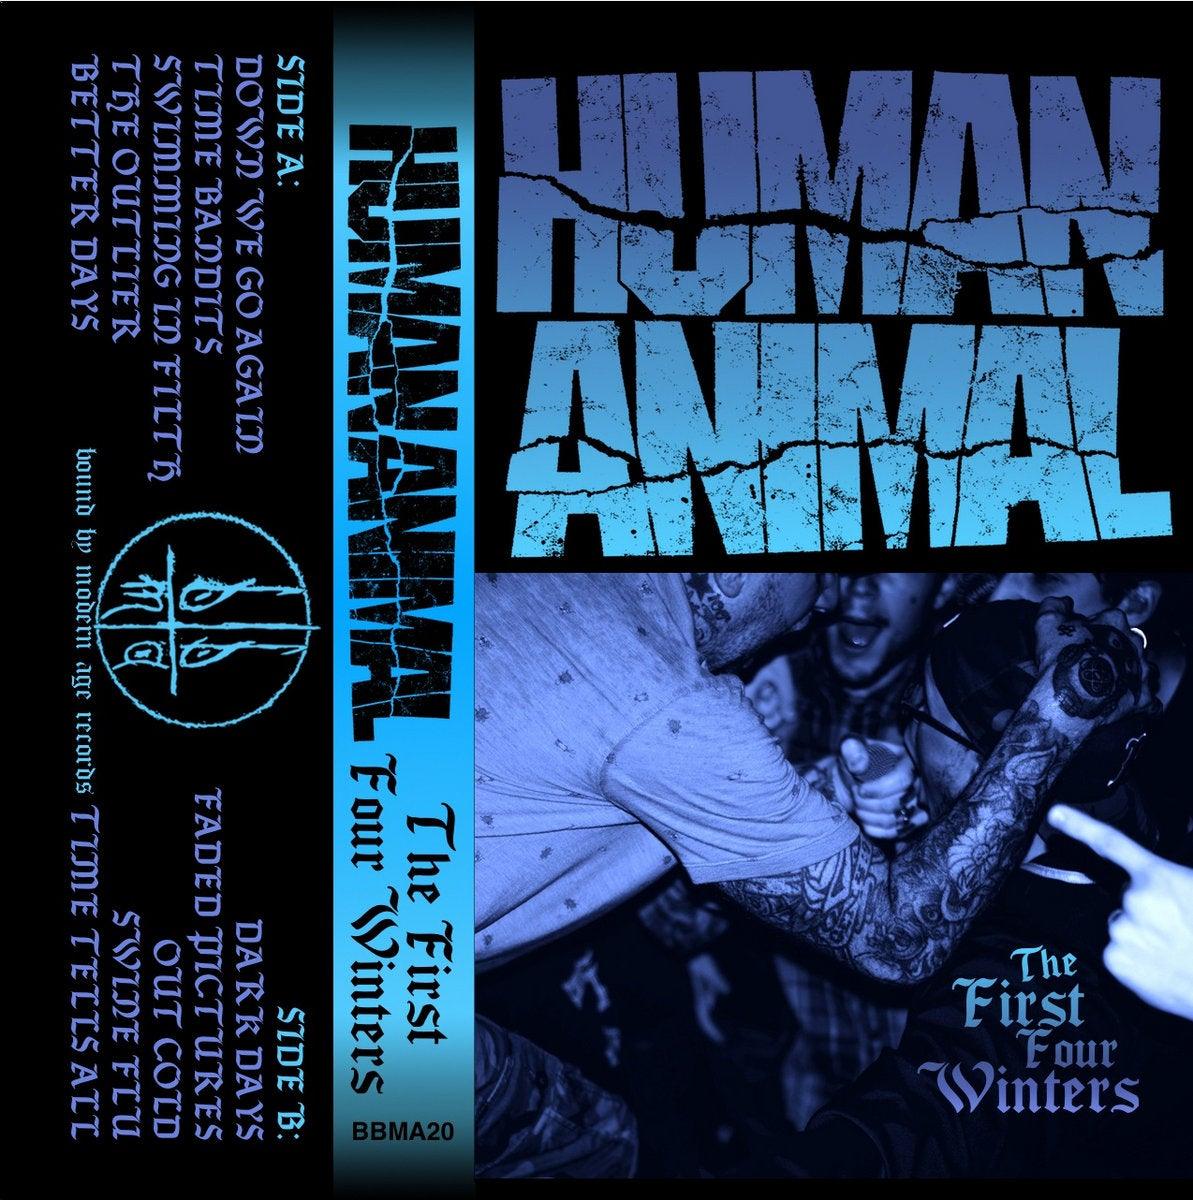 Buy – Human Animal "The First Four Winters" CD – Band & Music Merch – Cold Cuts Merch